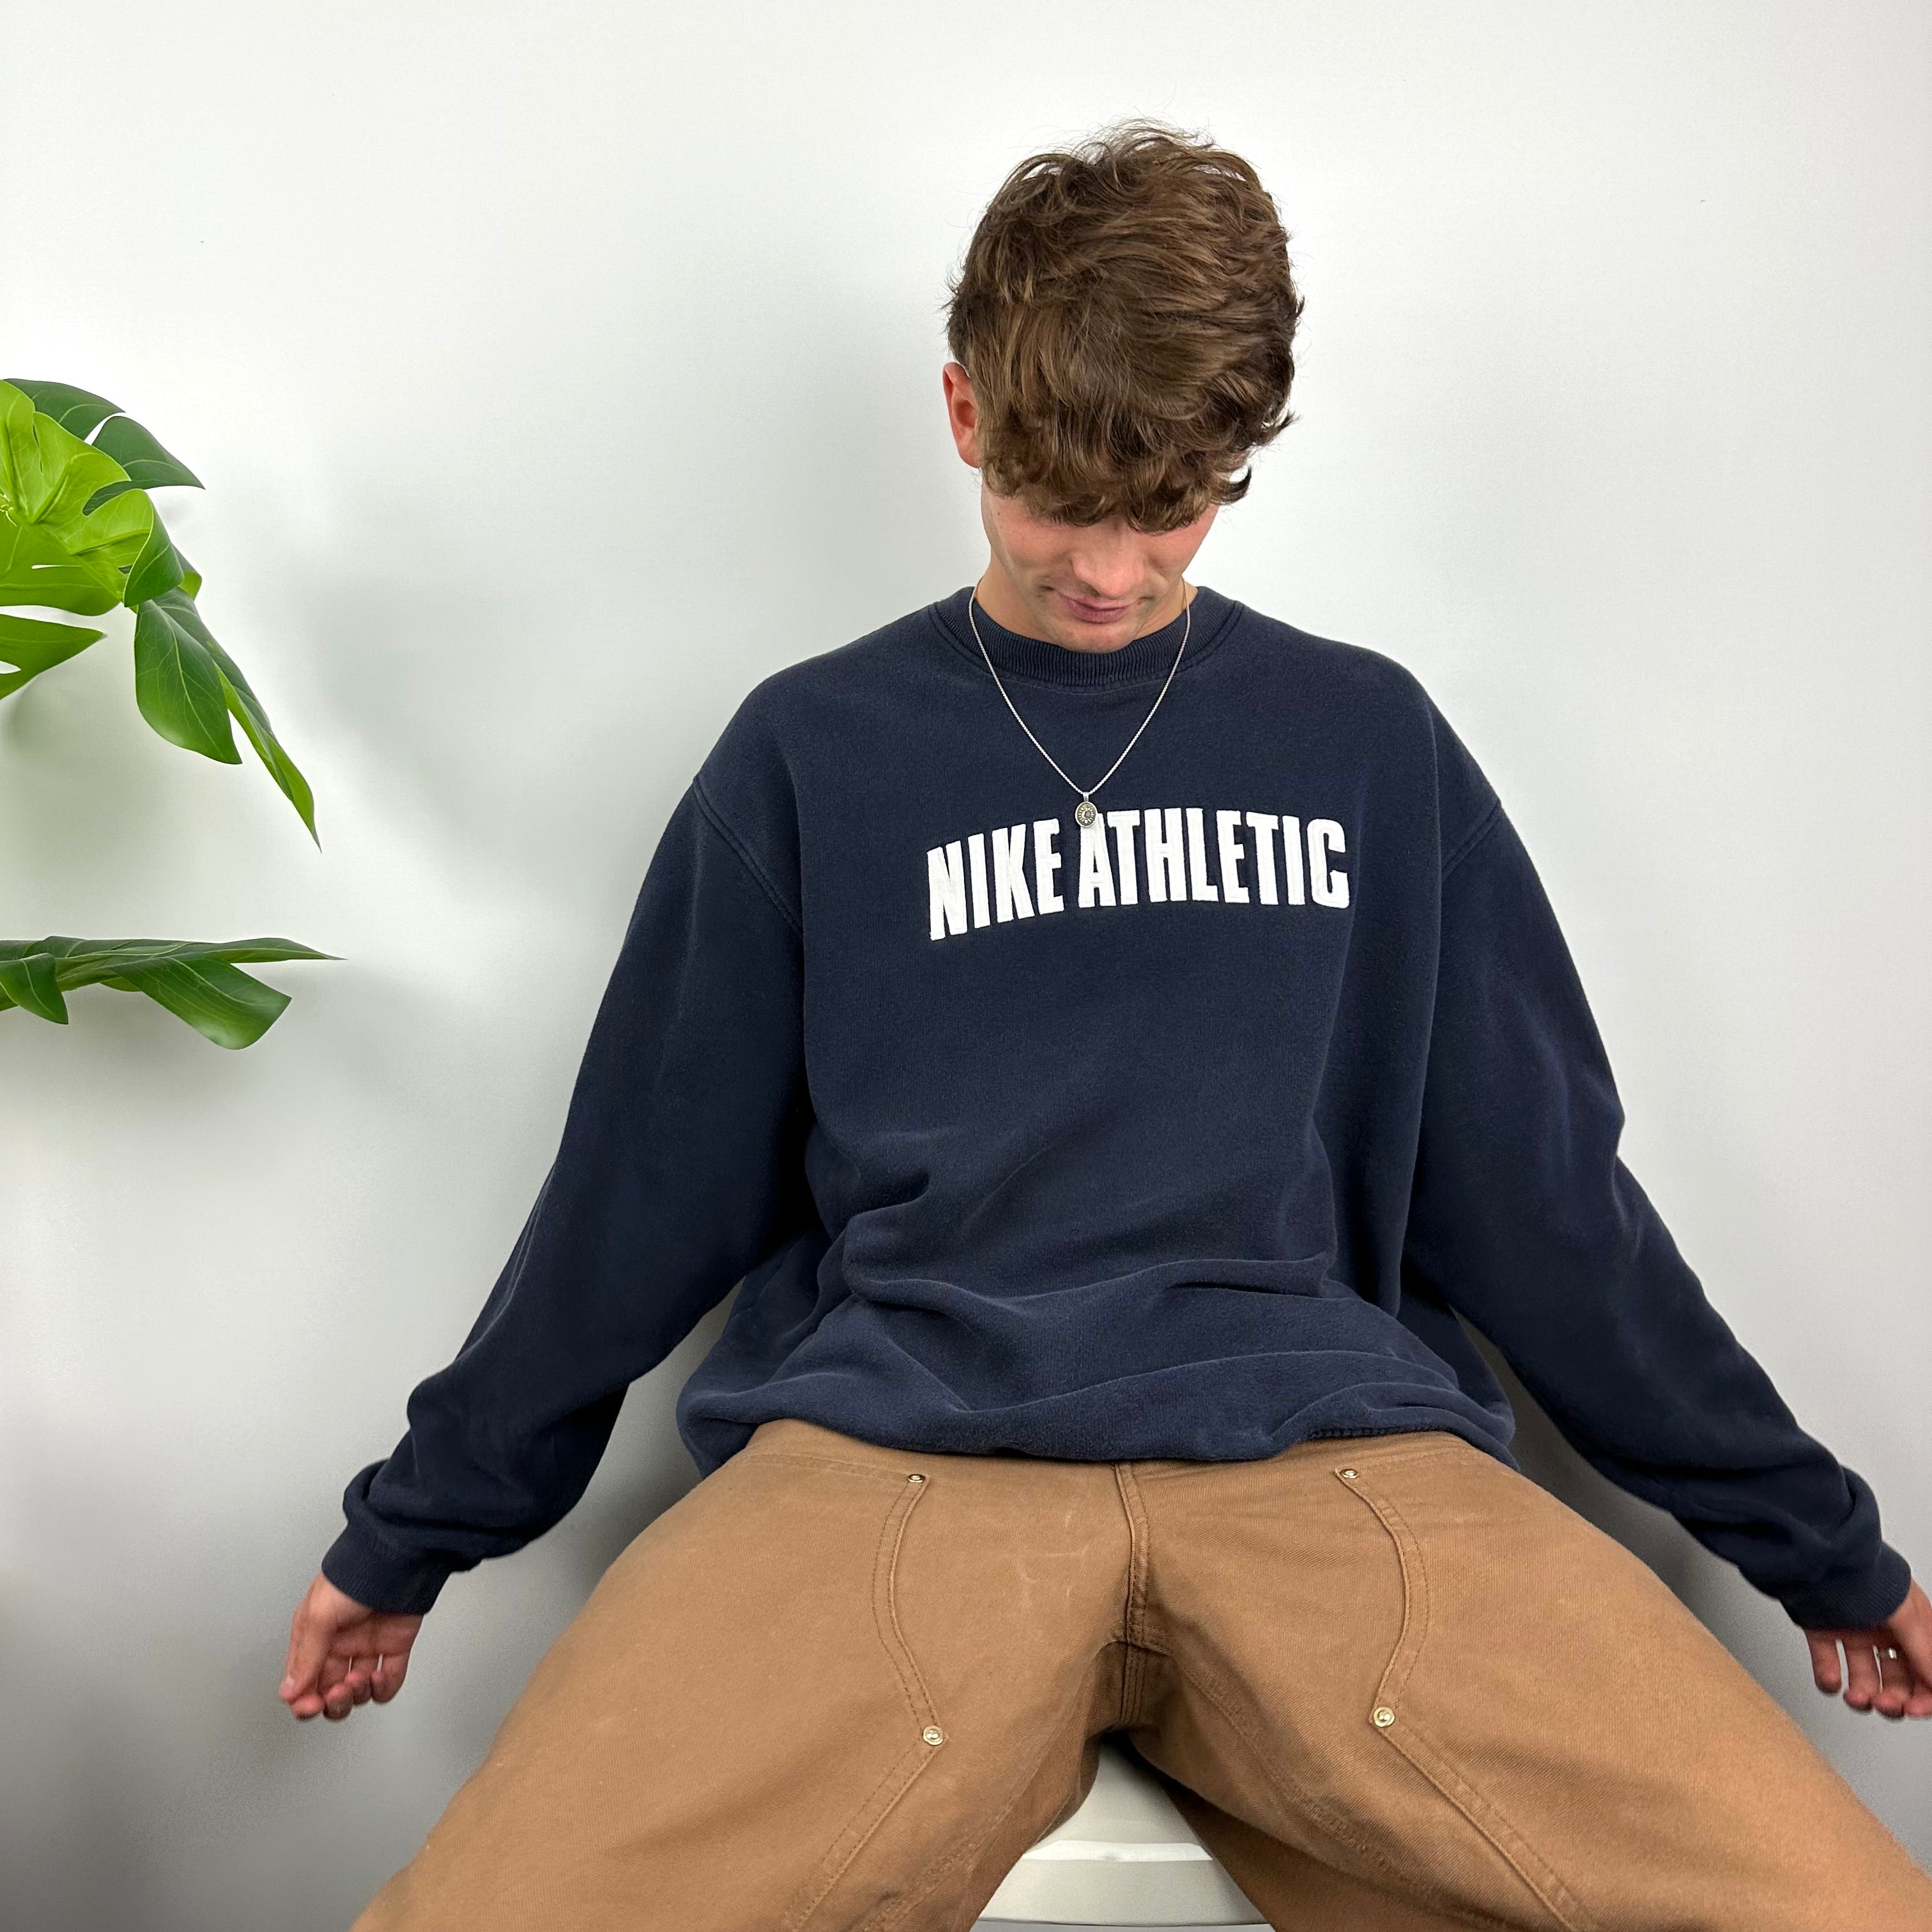 Nike Athletic RARE Navy Embroidered Spell Out Sweatshirt (XL)